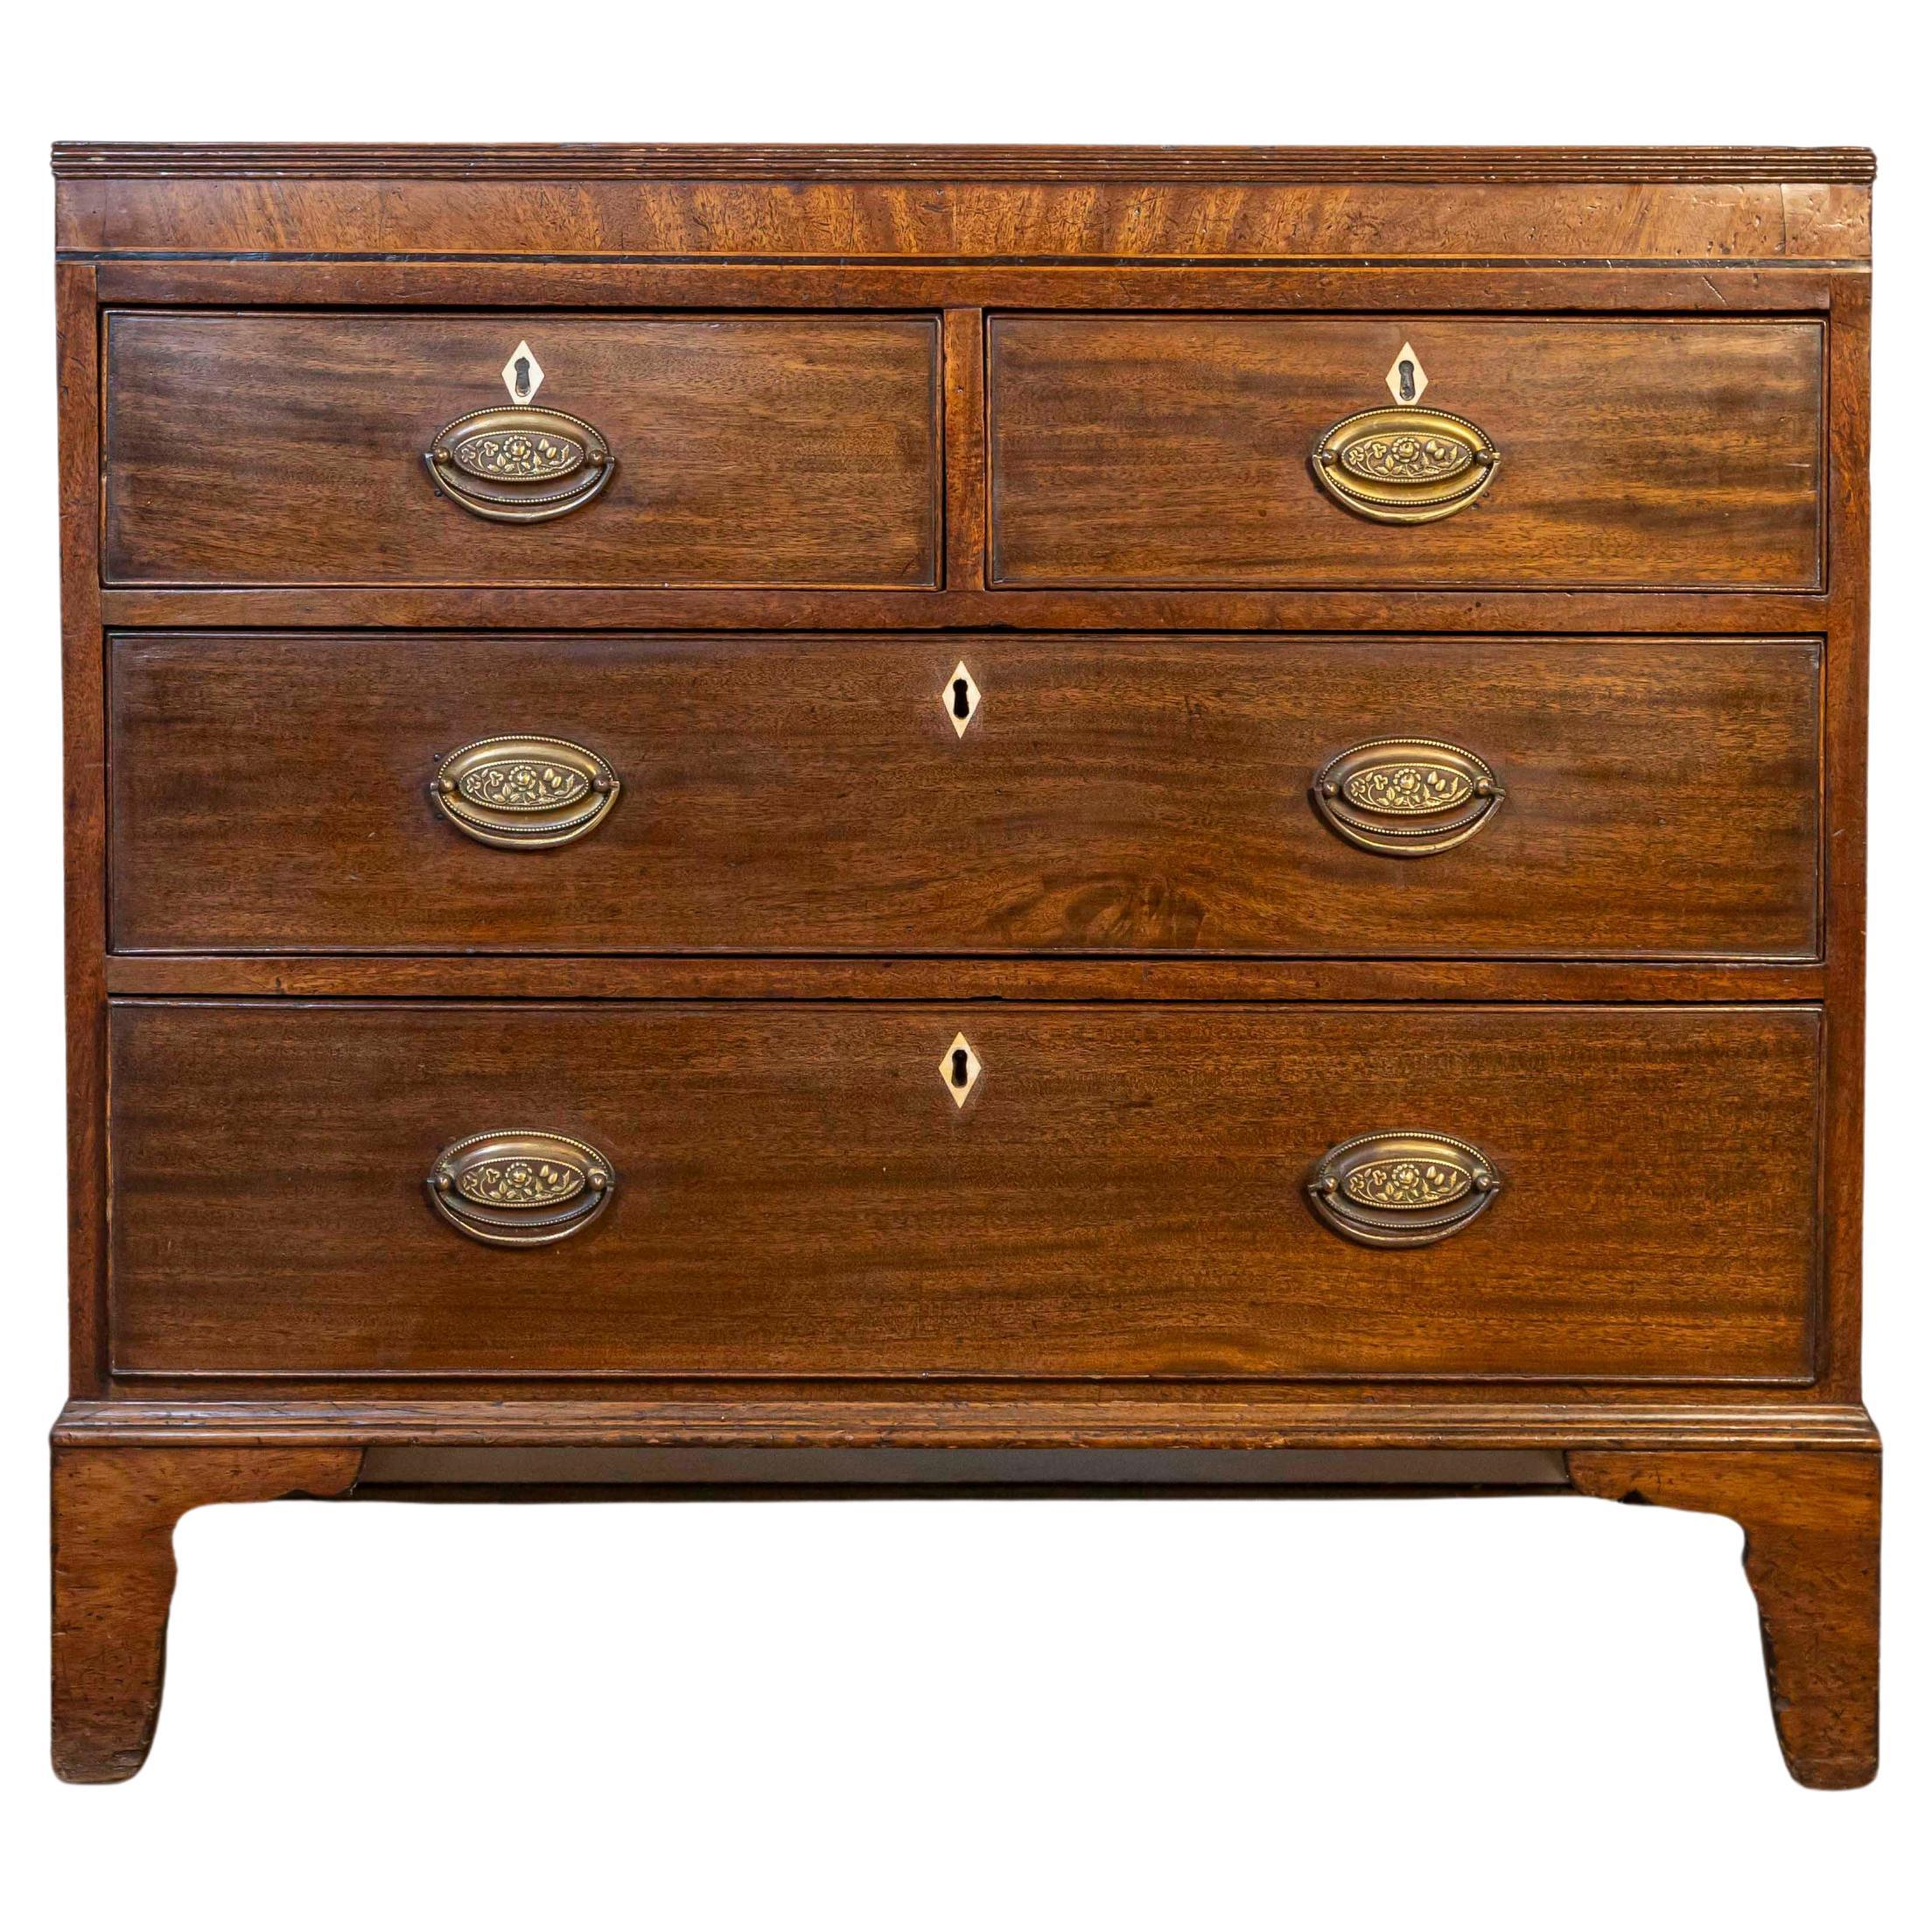 English Georgian Style Walnut Four-Drawer Chest with Sheraton Style Hardware For Sale